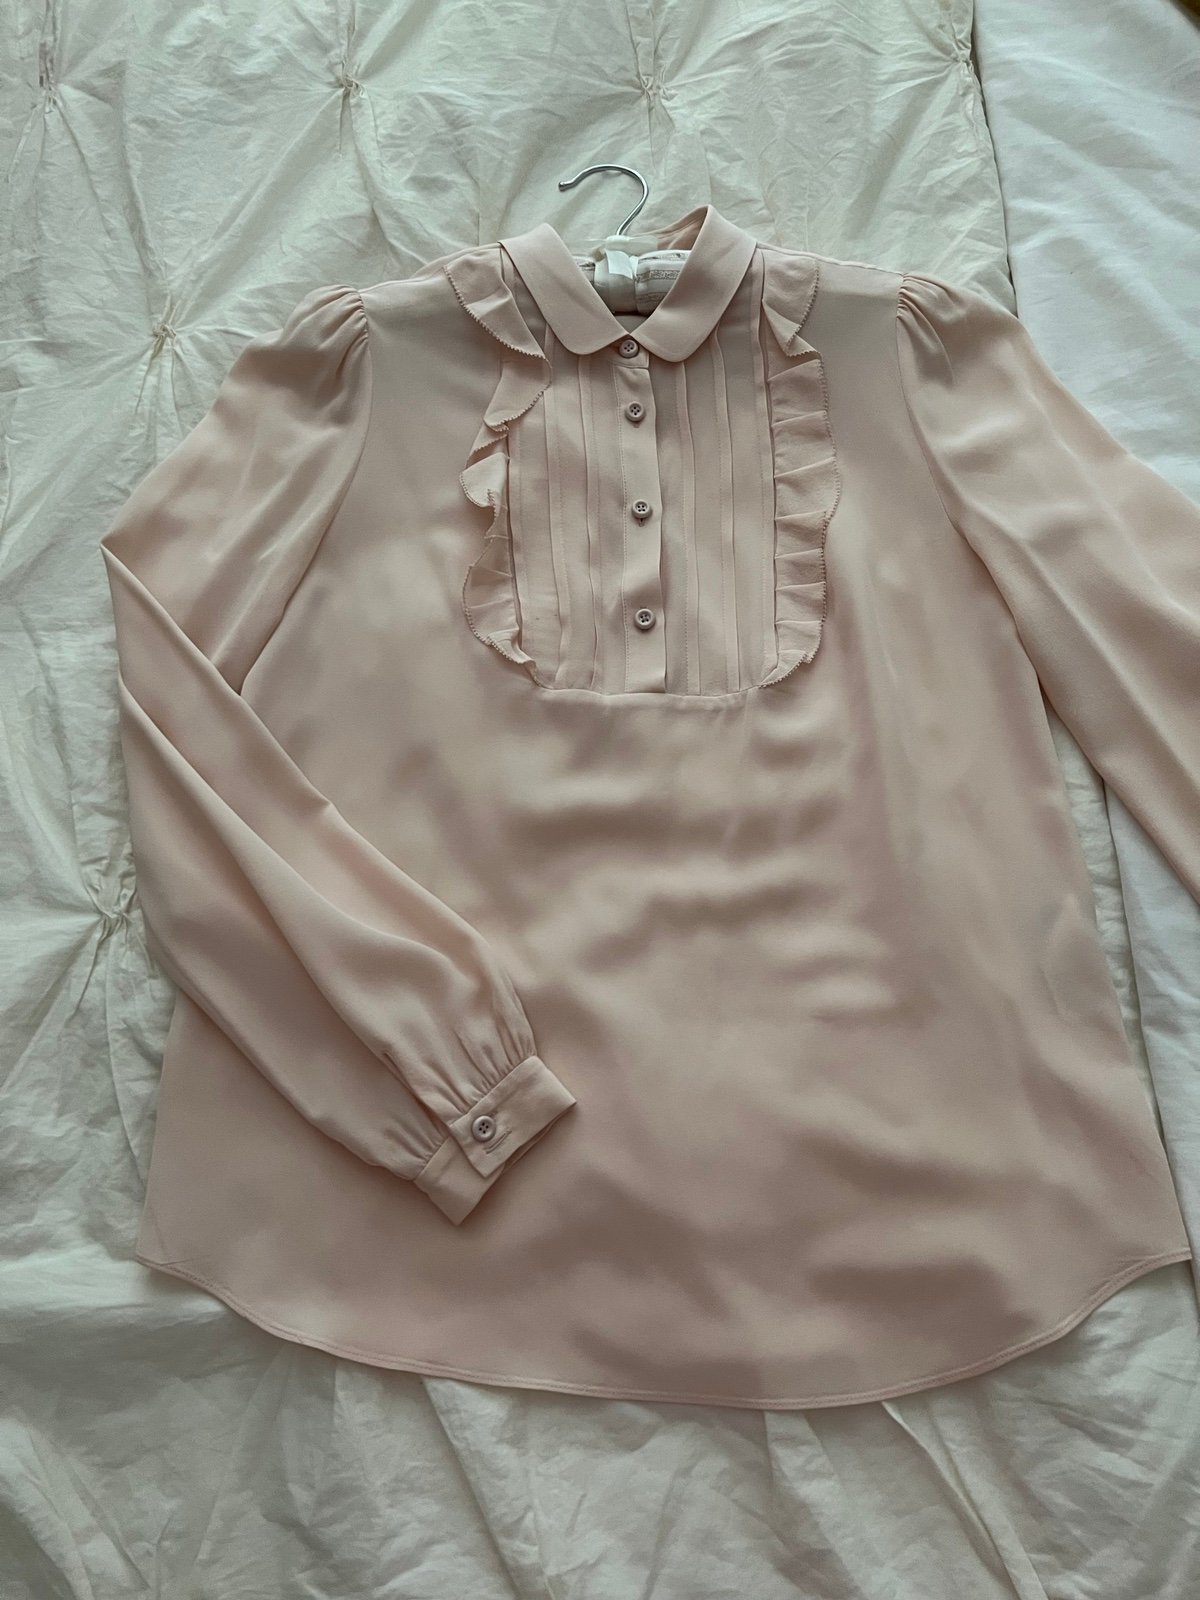 save up to 70% Kate Spade New York Silk Blouse O3drRa82